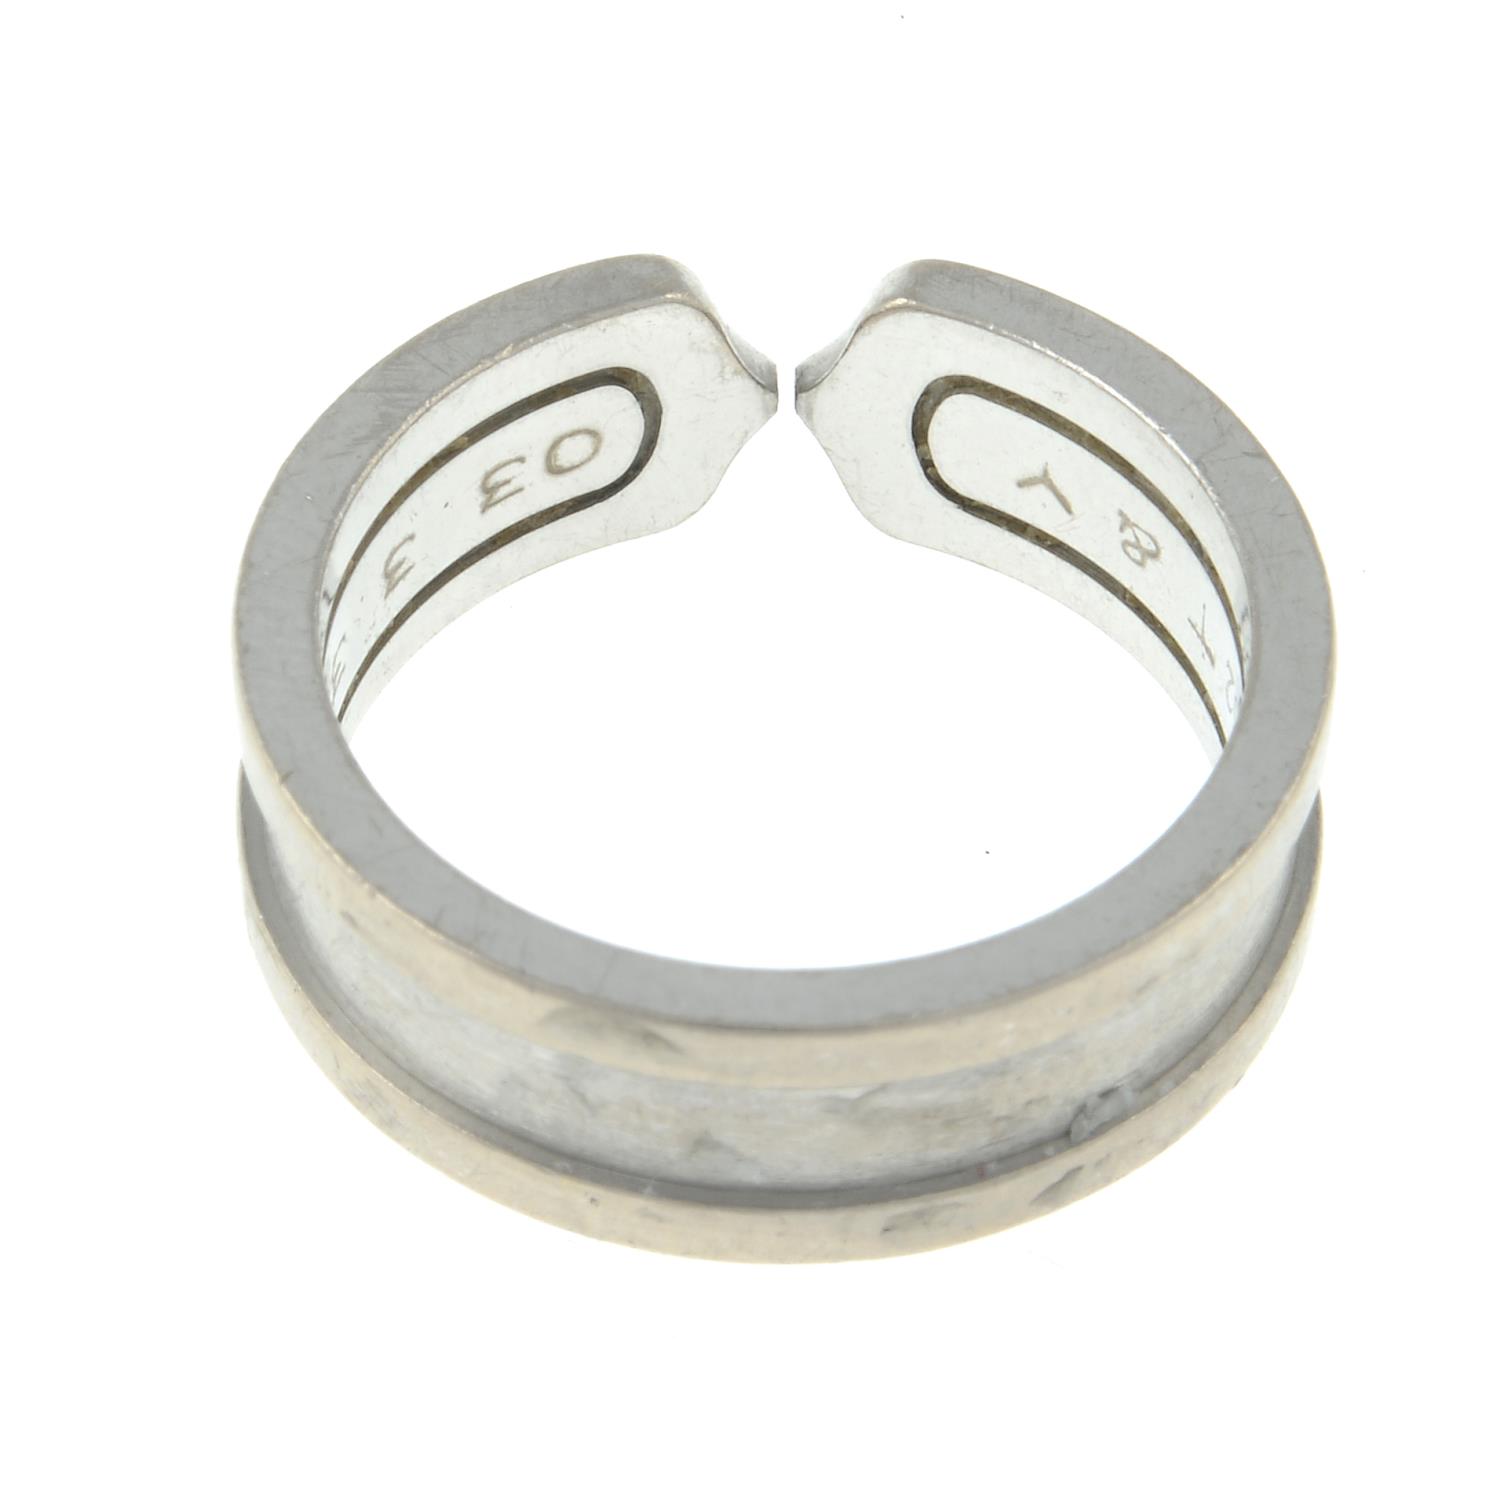 A 'C De Cartier' ring, by Cartier.Signed Cartier, N 34160.Italian marks. - Image 3 of 3